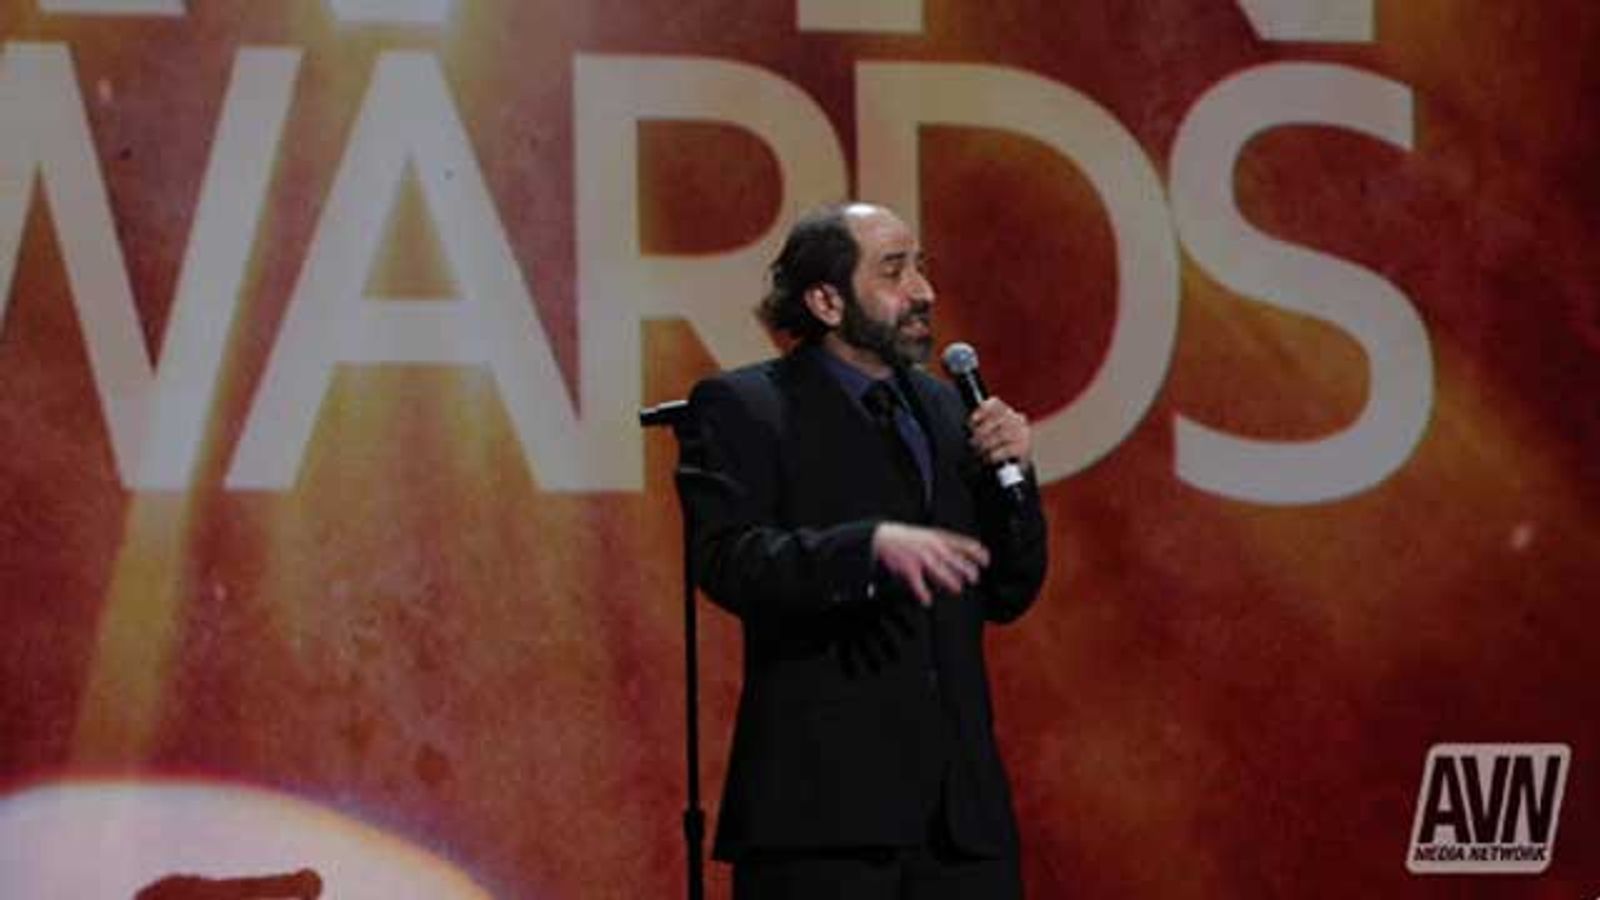 Porn-Friendly Dave Attell to Host New Comedy Central Series